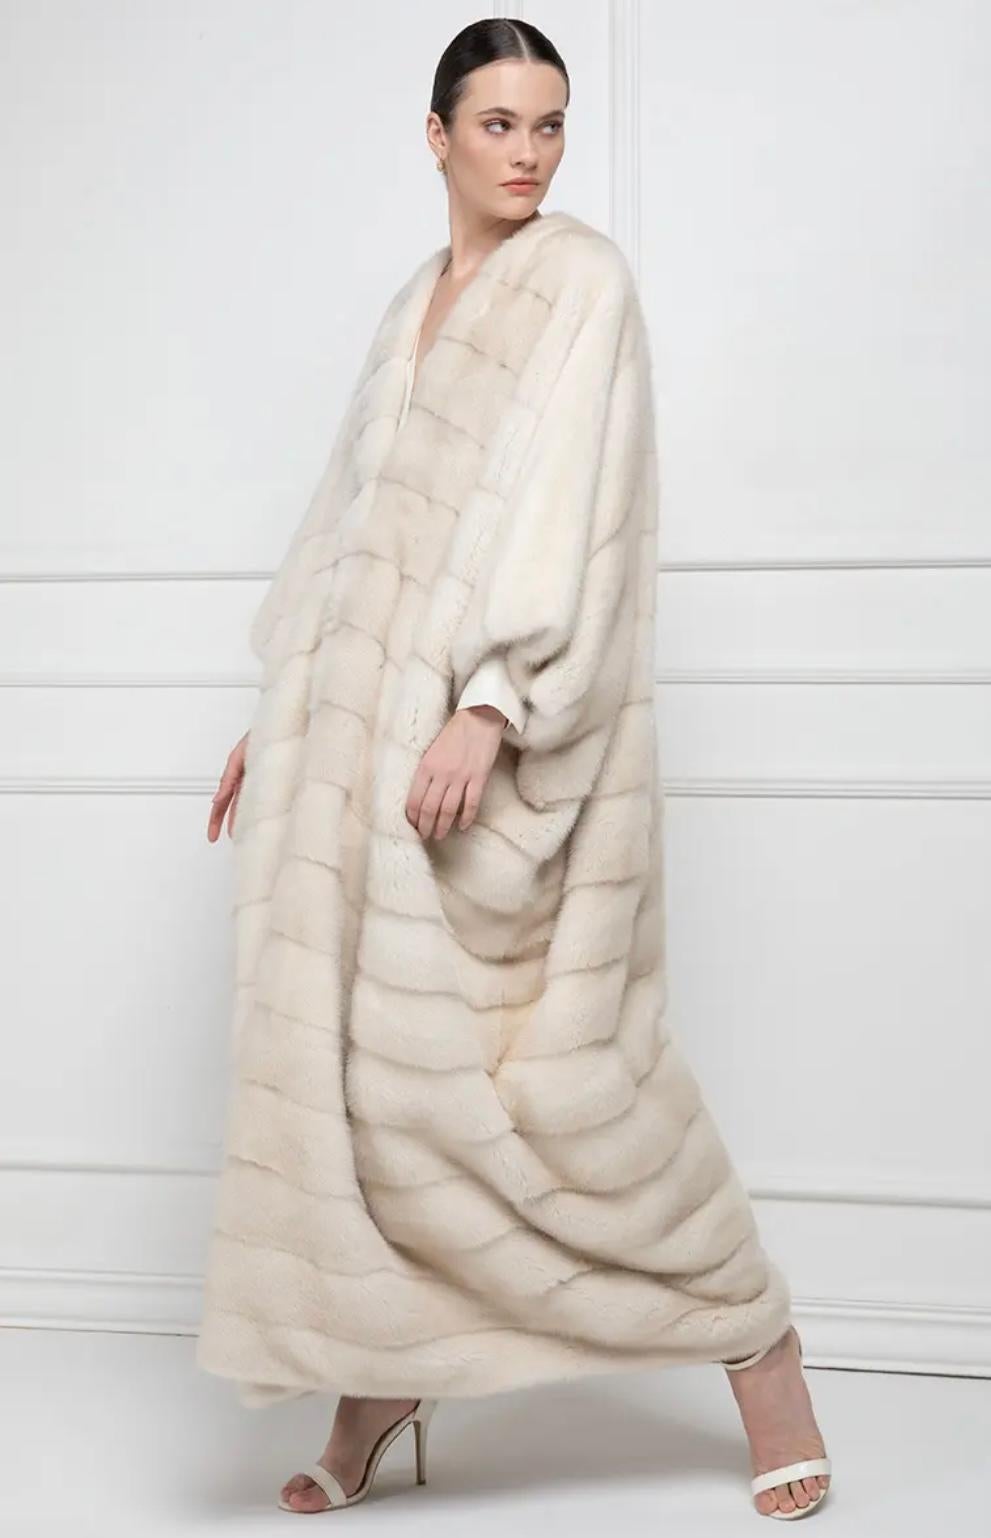 Female Mink Fur
Mink Coat with whole skins. Also this honey mink coat, as the most part of the collection, is made by using female mink carefully selected by our laboratories. The type of mink fur used for this mink coat is Danish, precisely from